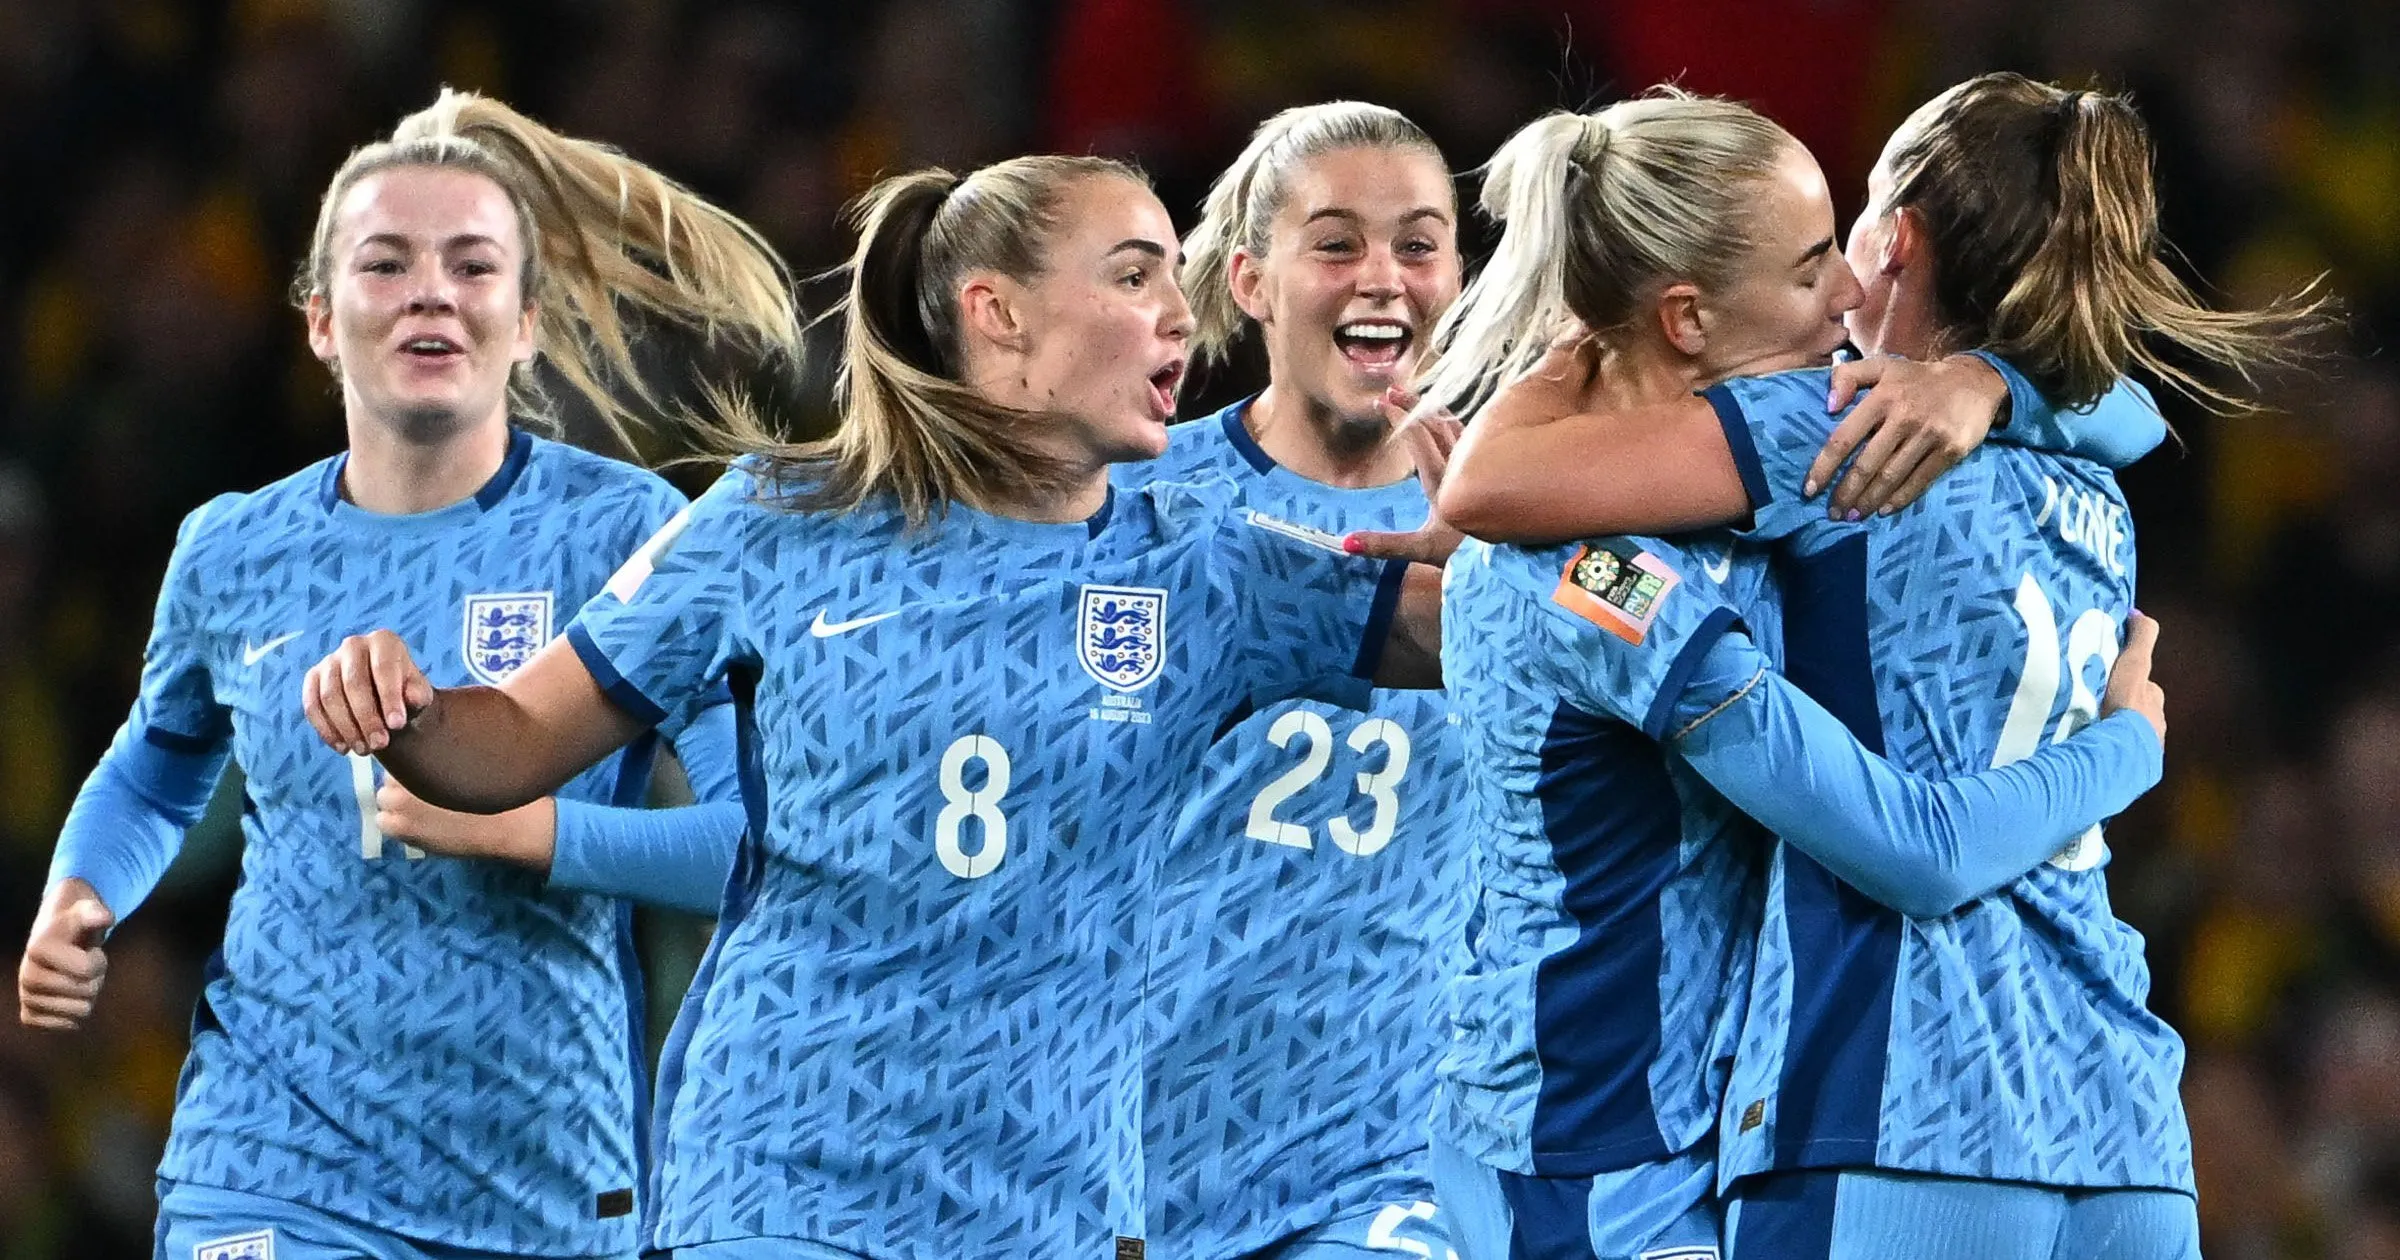 ‘No plans’ for bank holiday if England Lionesses win World Cup final